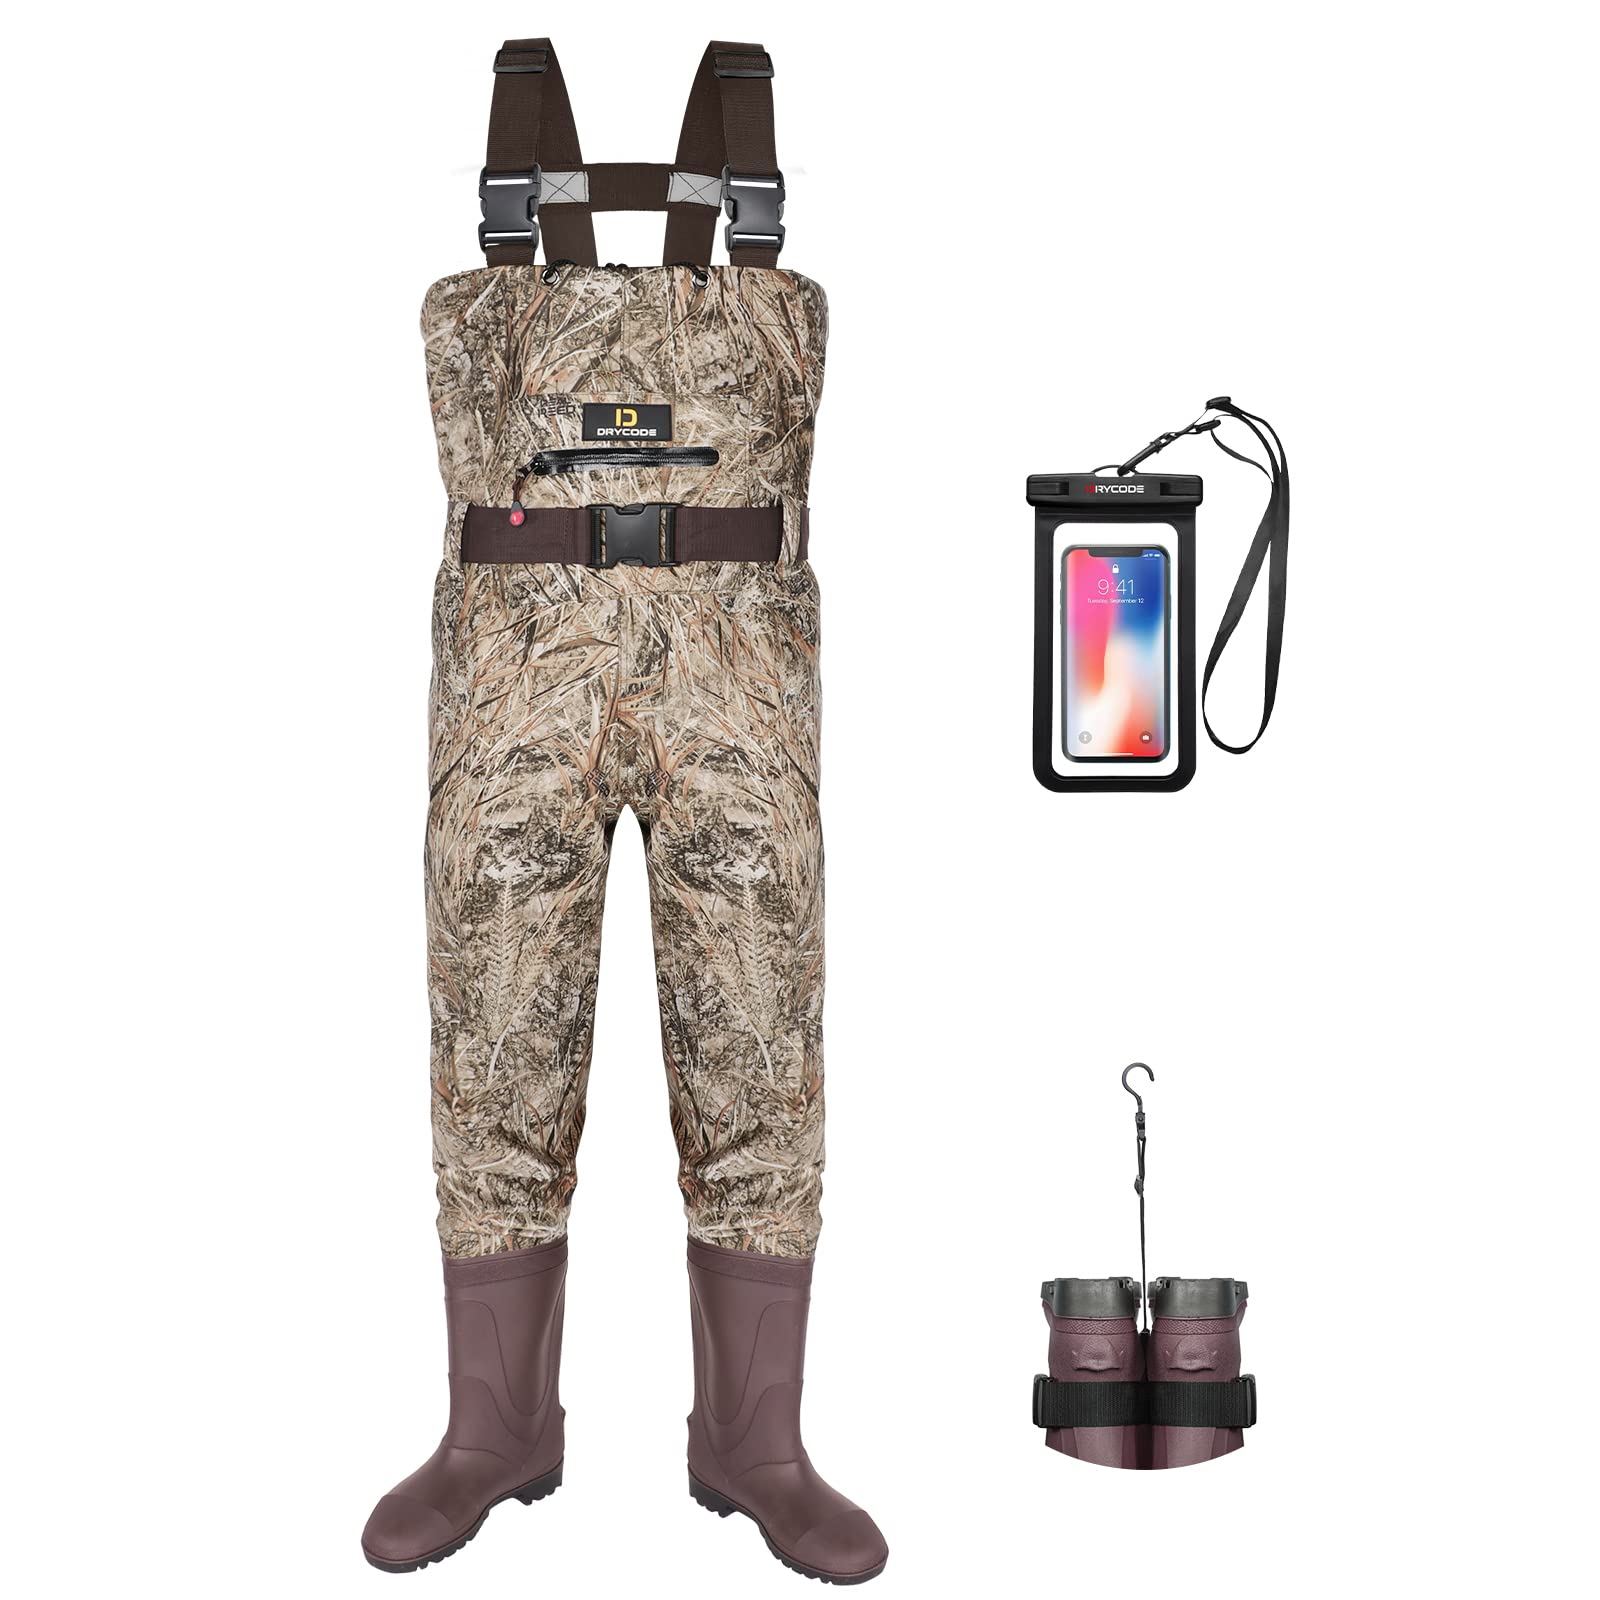 DRYCODE Waders for Men, Chest Waders for Men with Boots Waterproof, 2-Ply  Nylon/PVC Women's Duck Hunting Waders for Fishing M10/W12 Camo